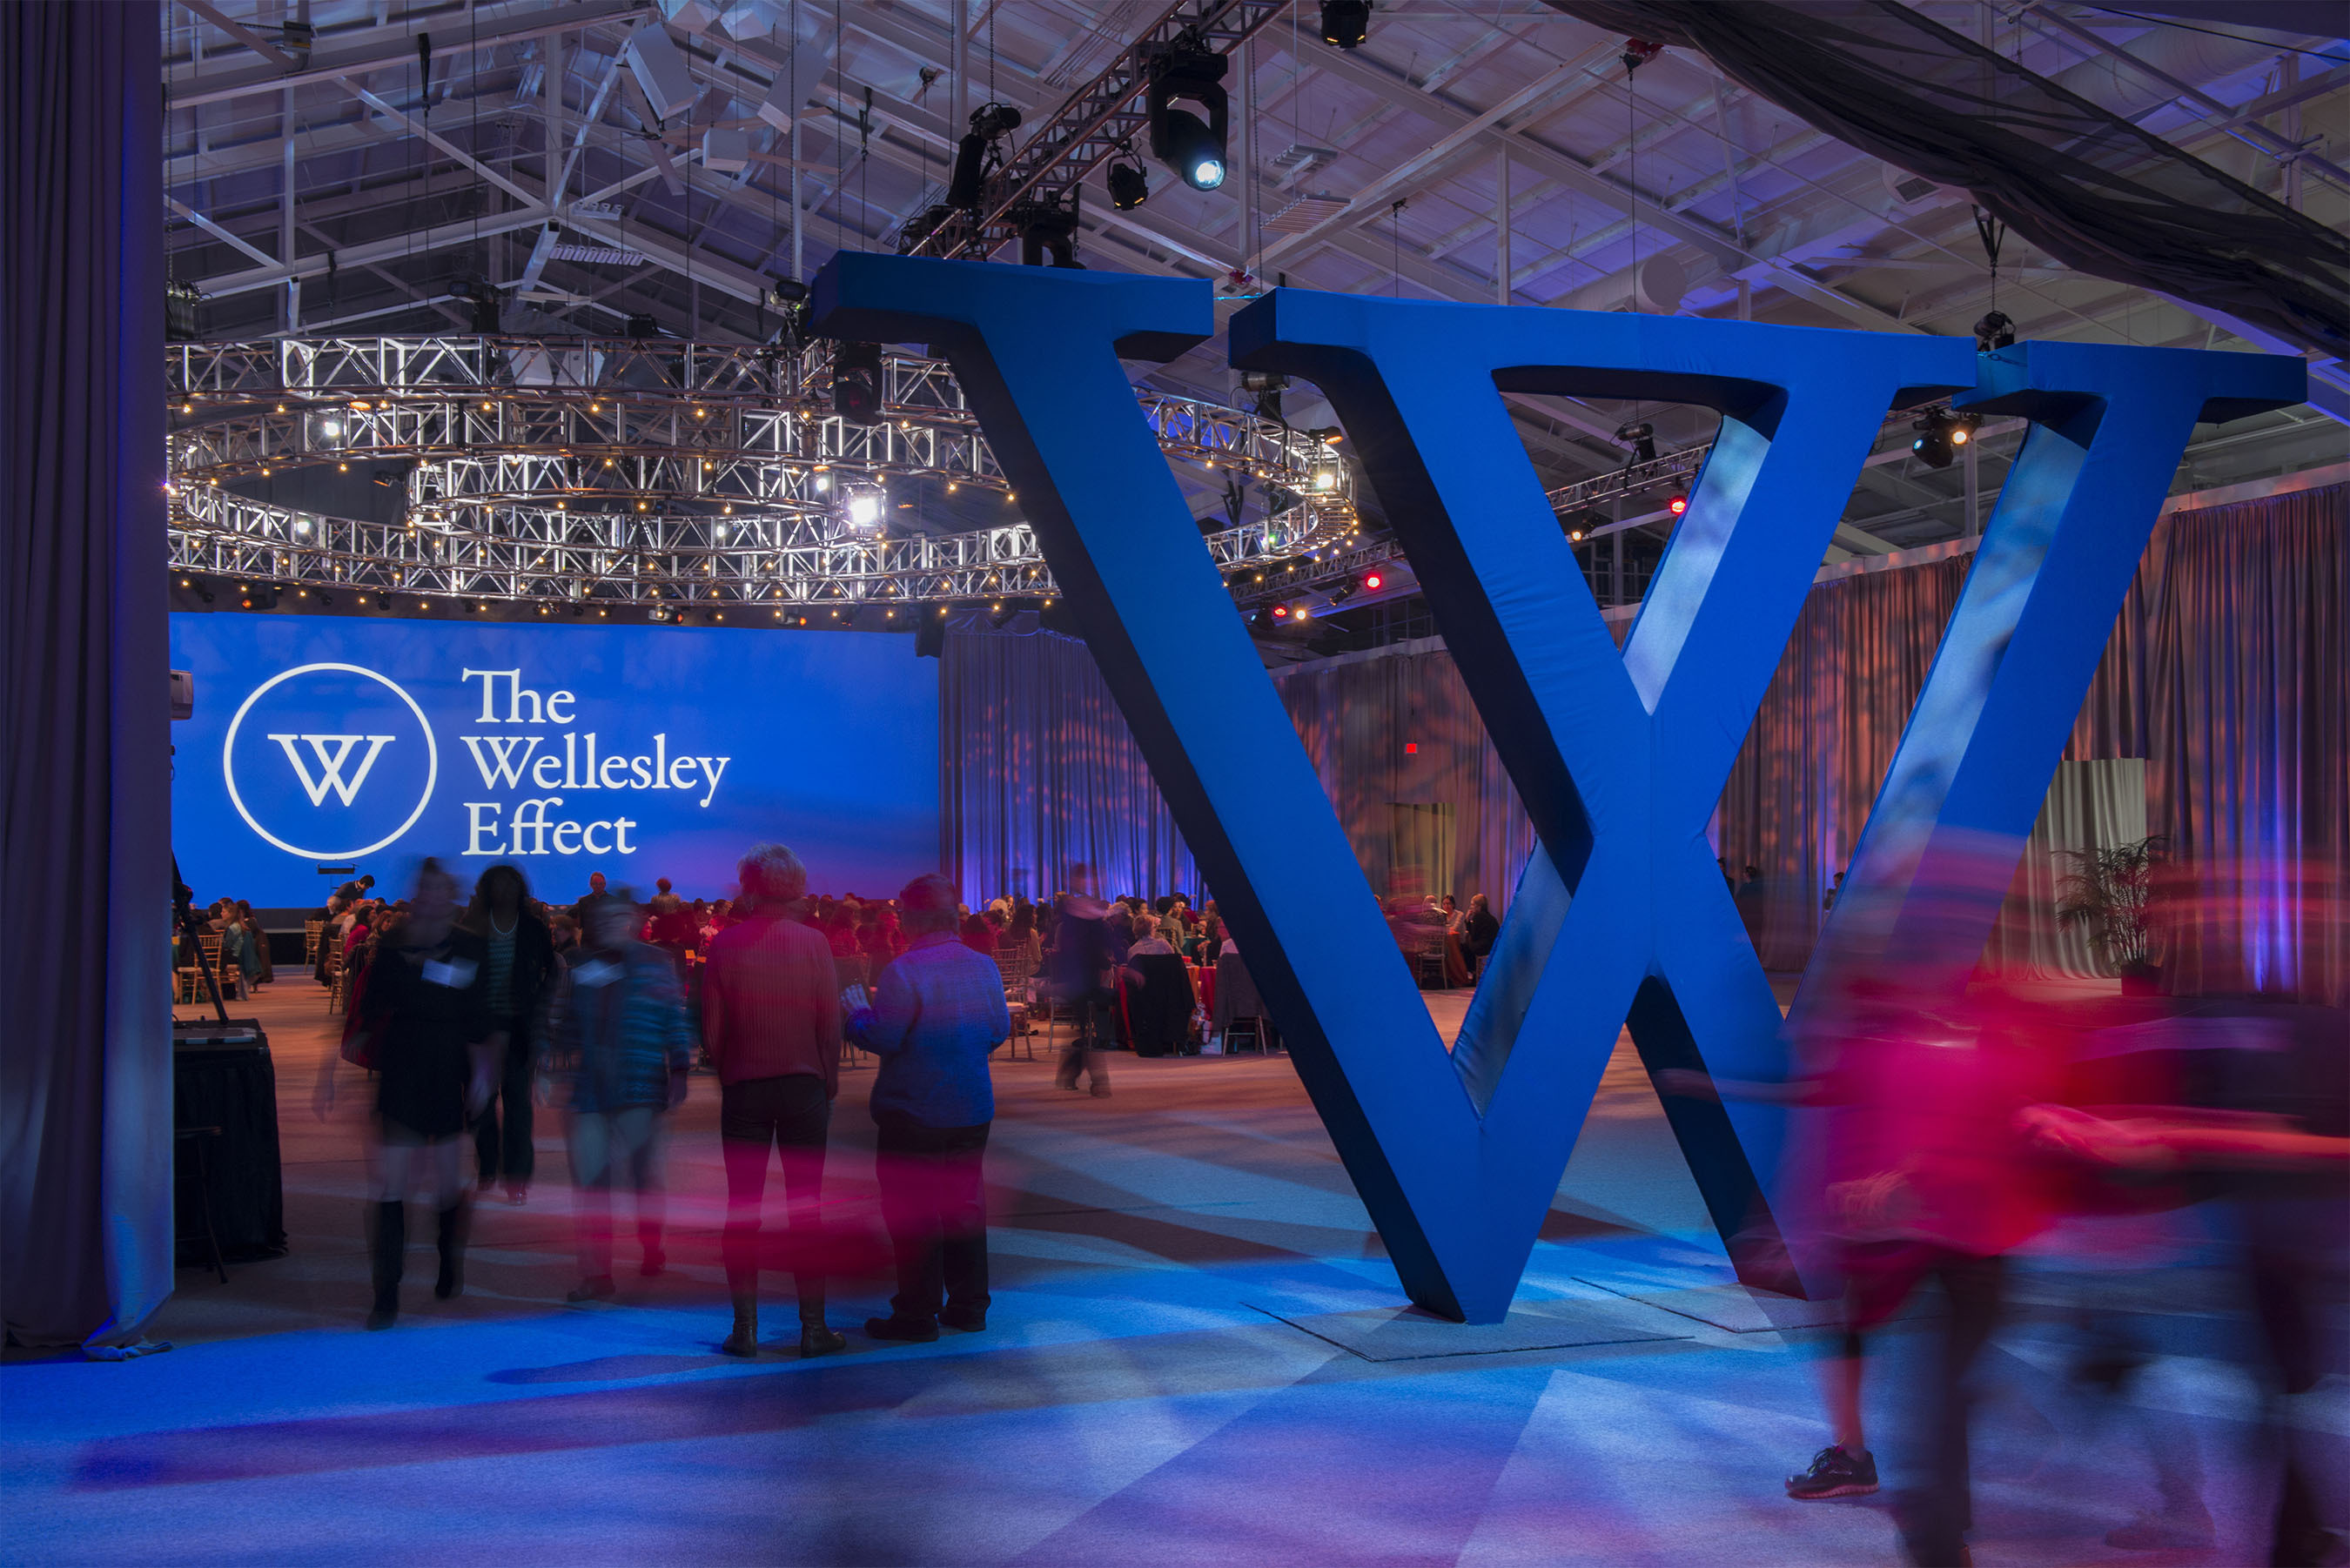 Wellesley announces largest donation in college history; record $50 million gift launches Wellesley’s $500 million campaign. On October 23, 2015, a dinner to announce the campaign held on Wellesley’s campus drew 600 people and alumnae leaders from all over the world, including Linda Wertheimer ’65, who emceed the event; Callie Crossley ’73, Ophelia Dahl ’94, Pam Melroy '83, and Robin Sparkman ’91.